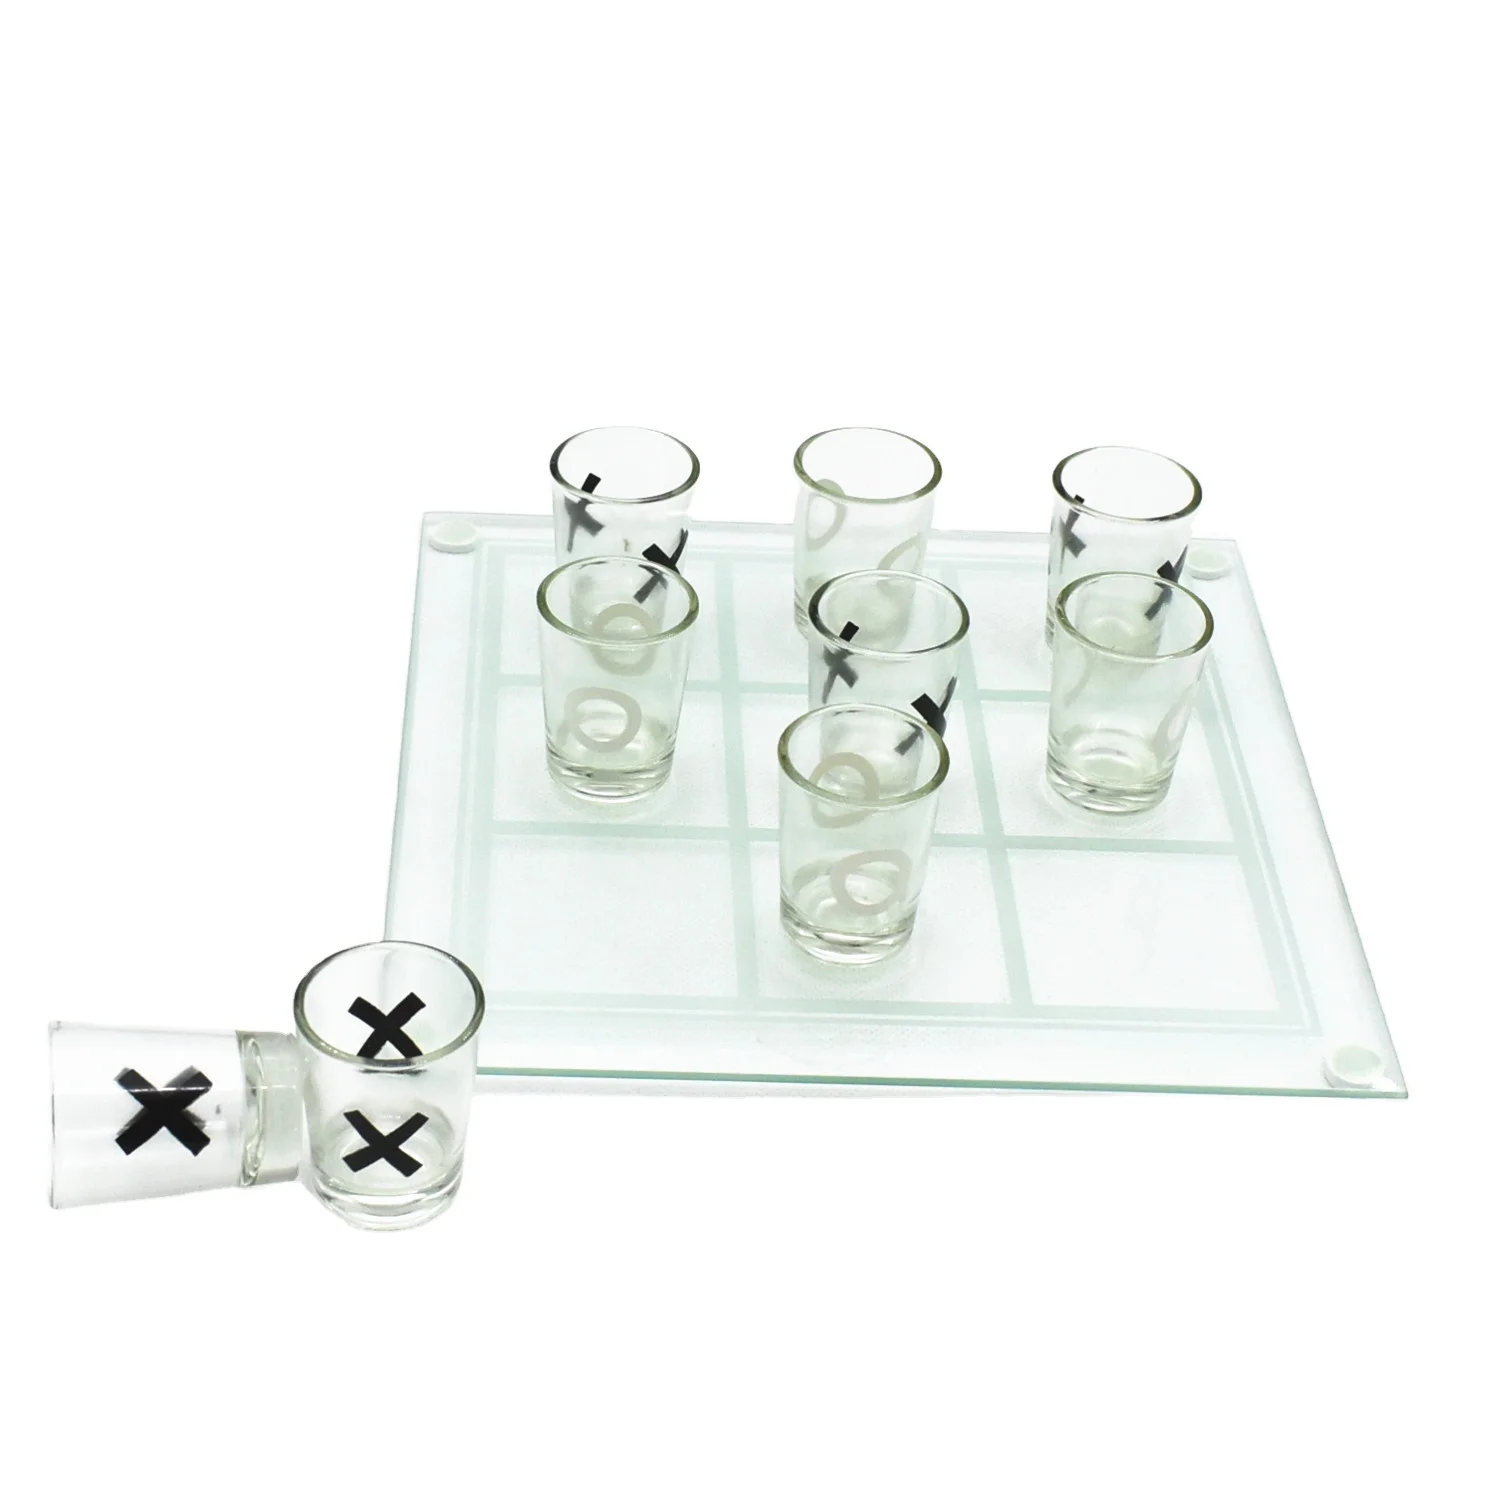 

tic-tac-toe glass chess board set and shot glass drinking chess drinking game